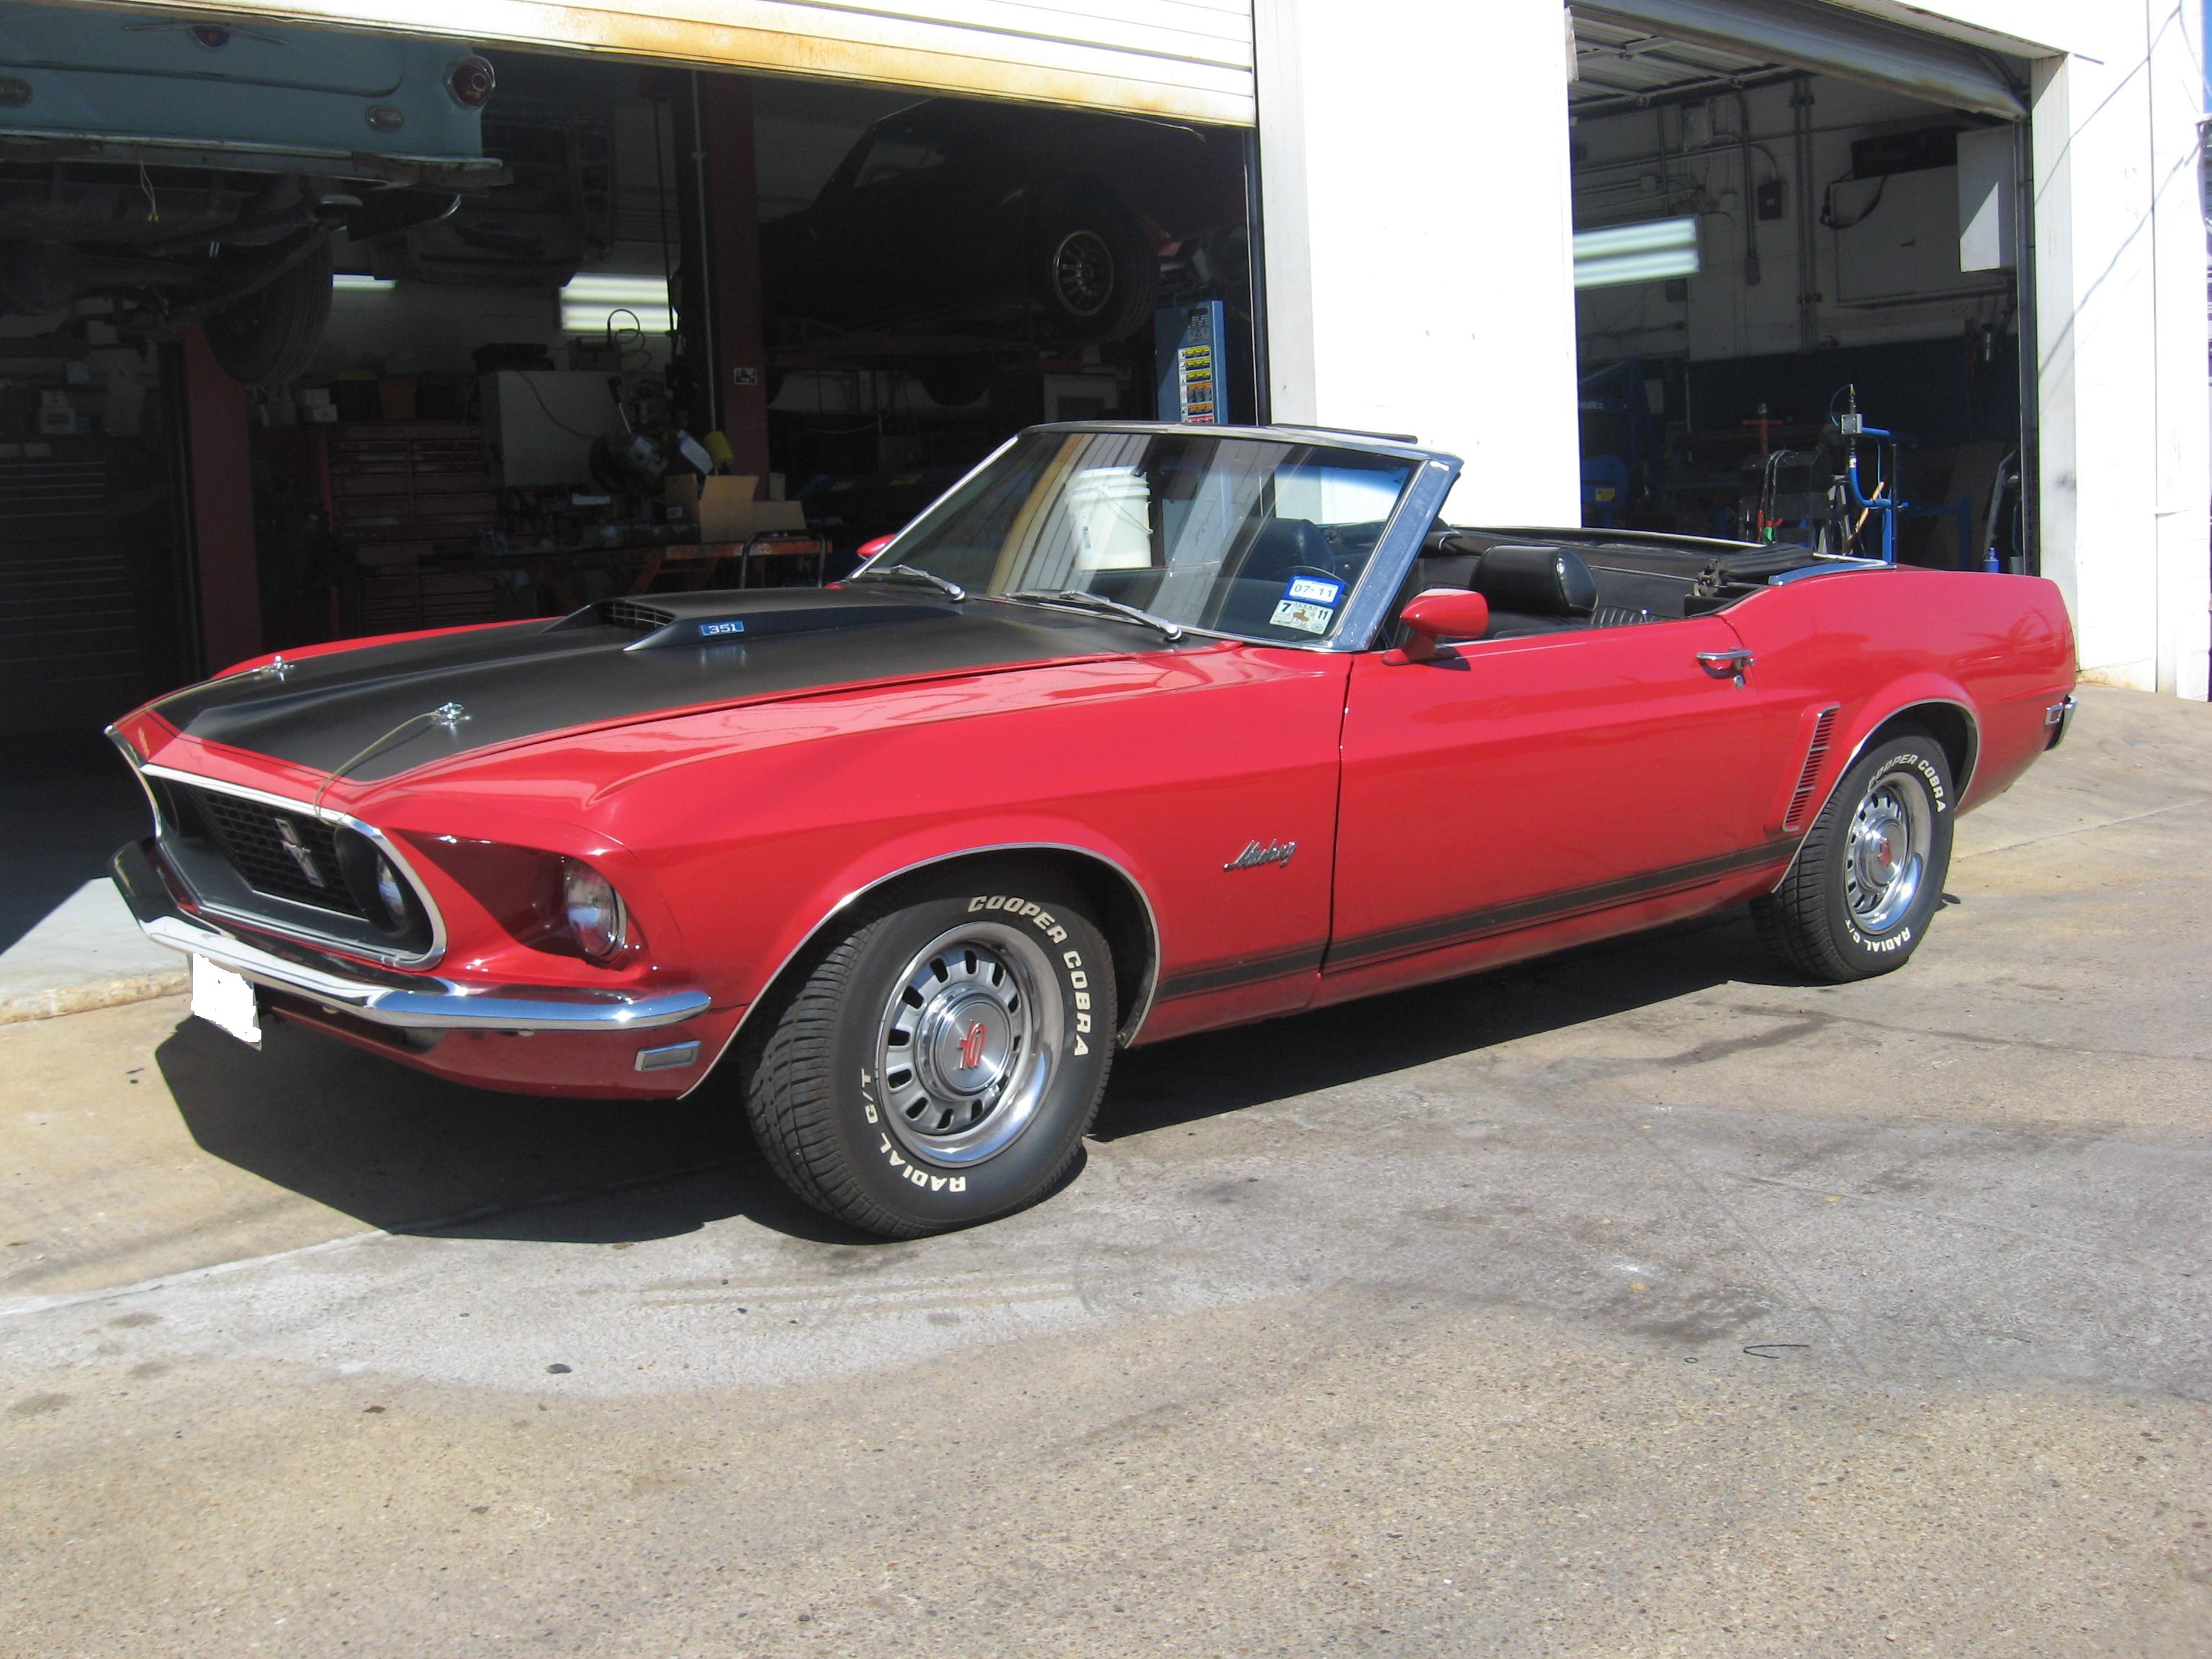 1969 Mustang Convertible - The